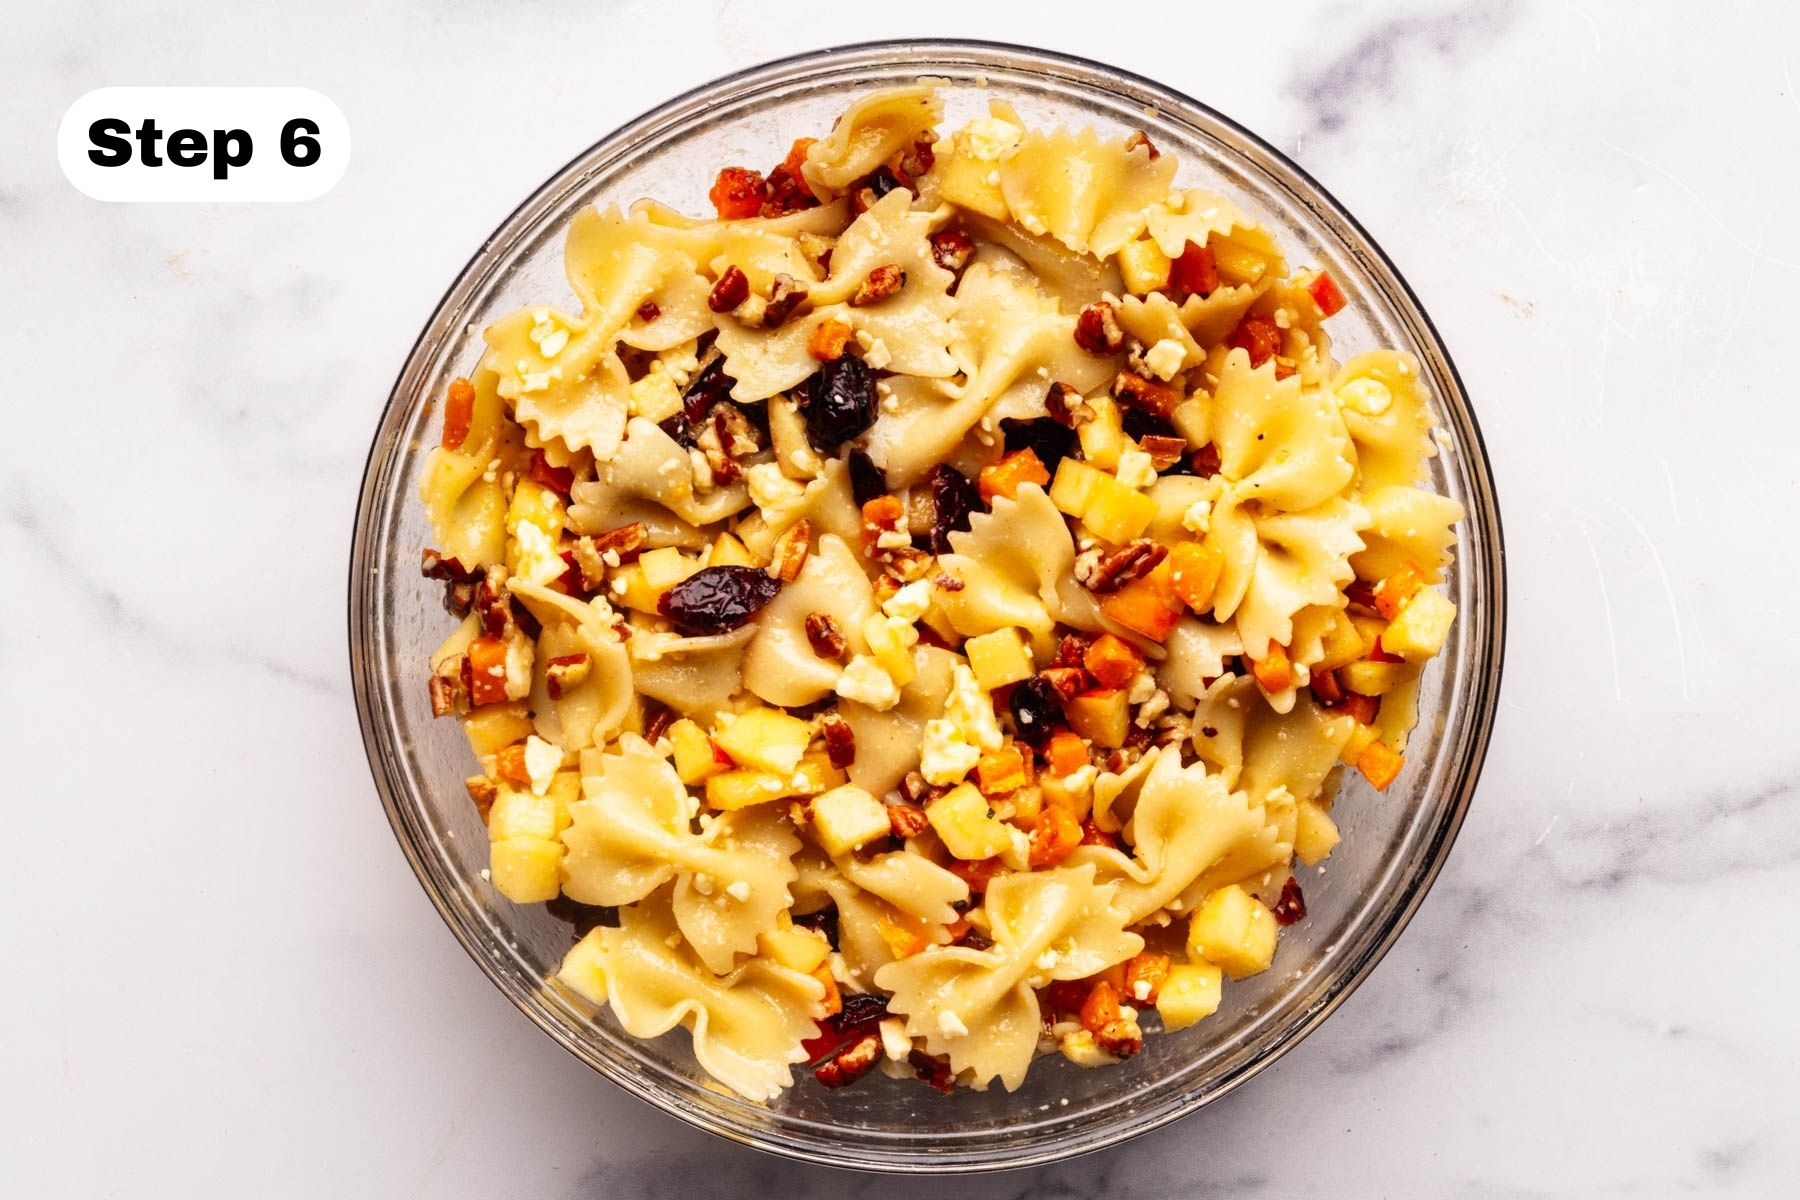 Pasta salad combined in a glass bowl